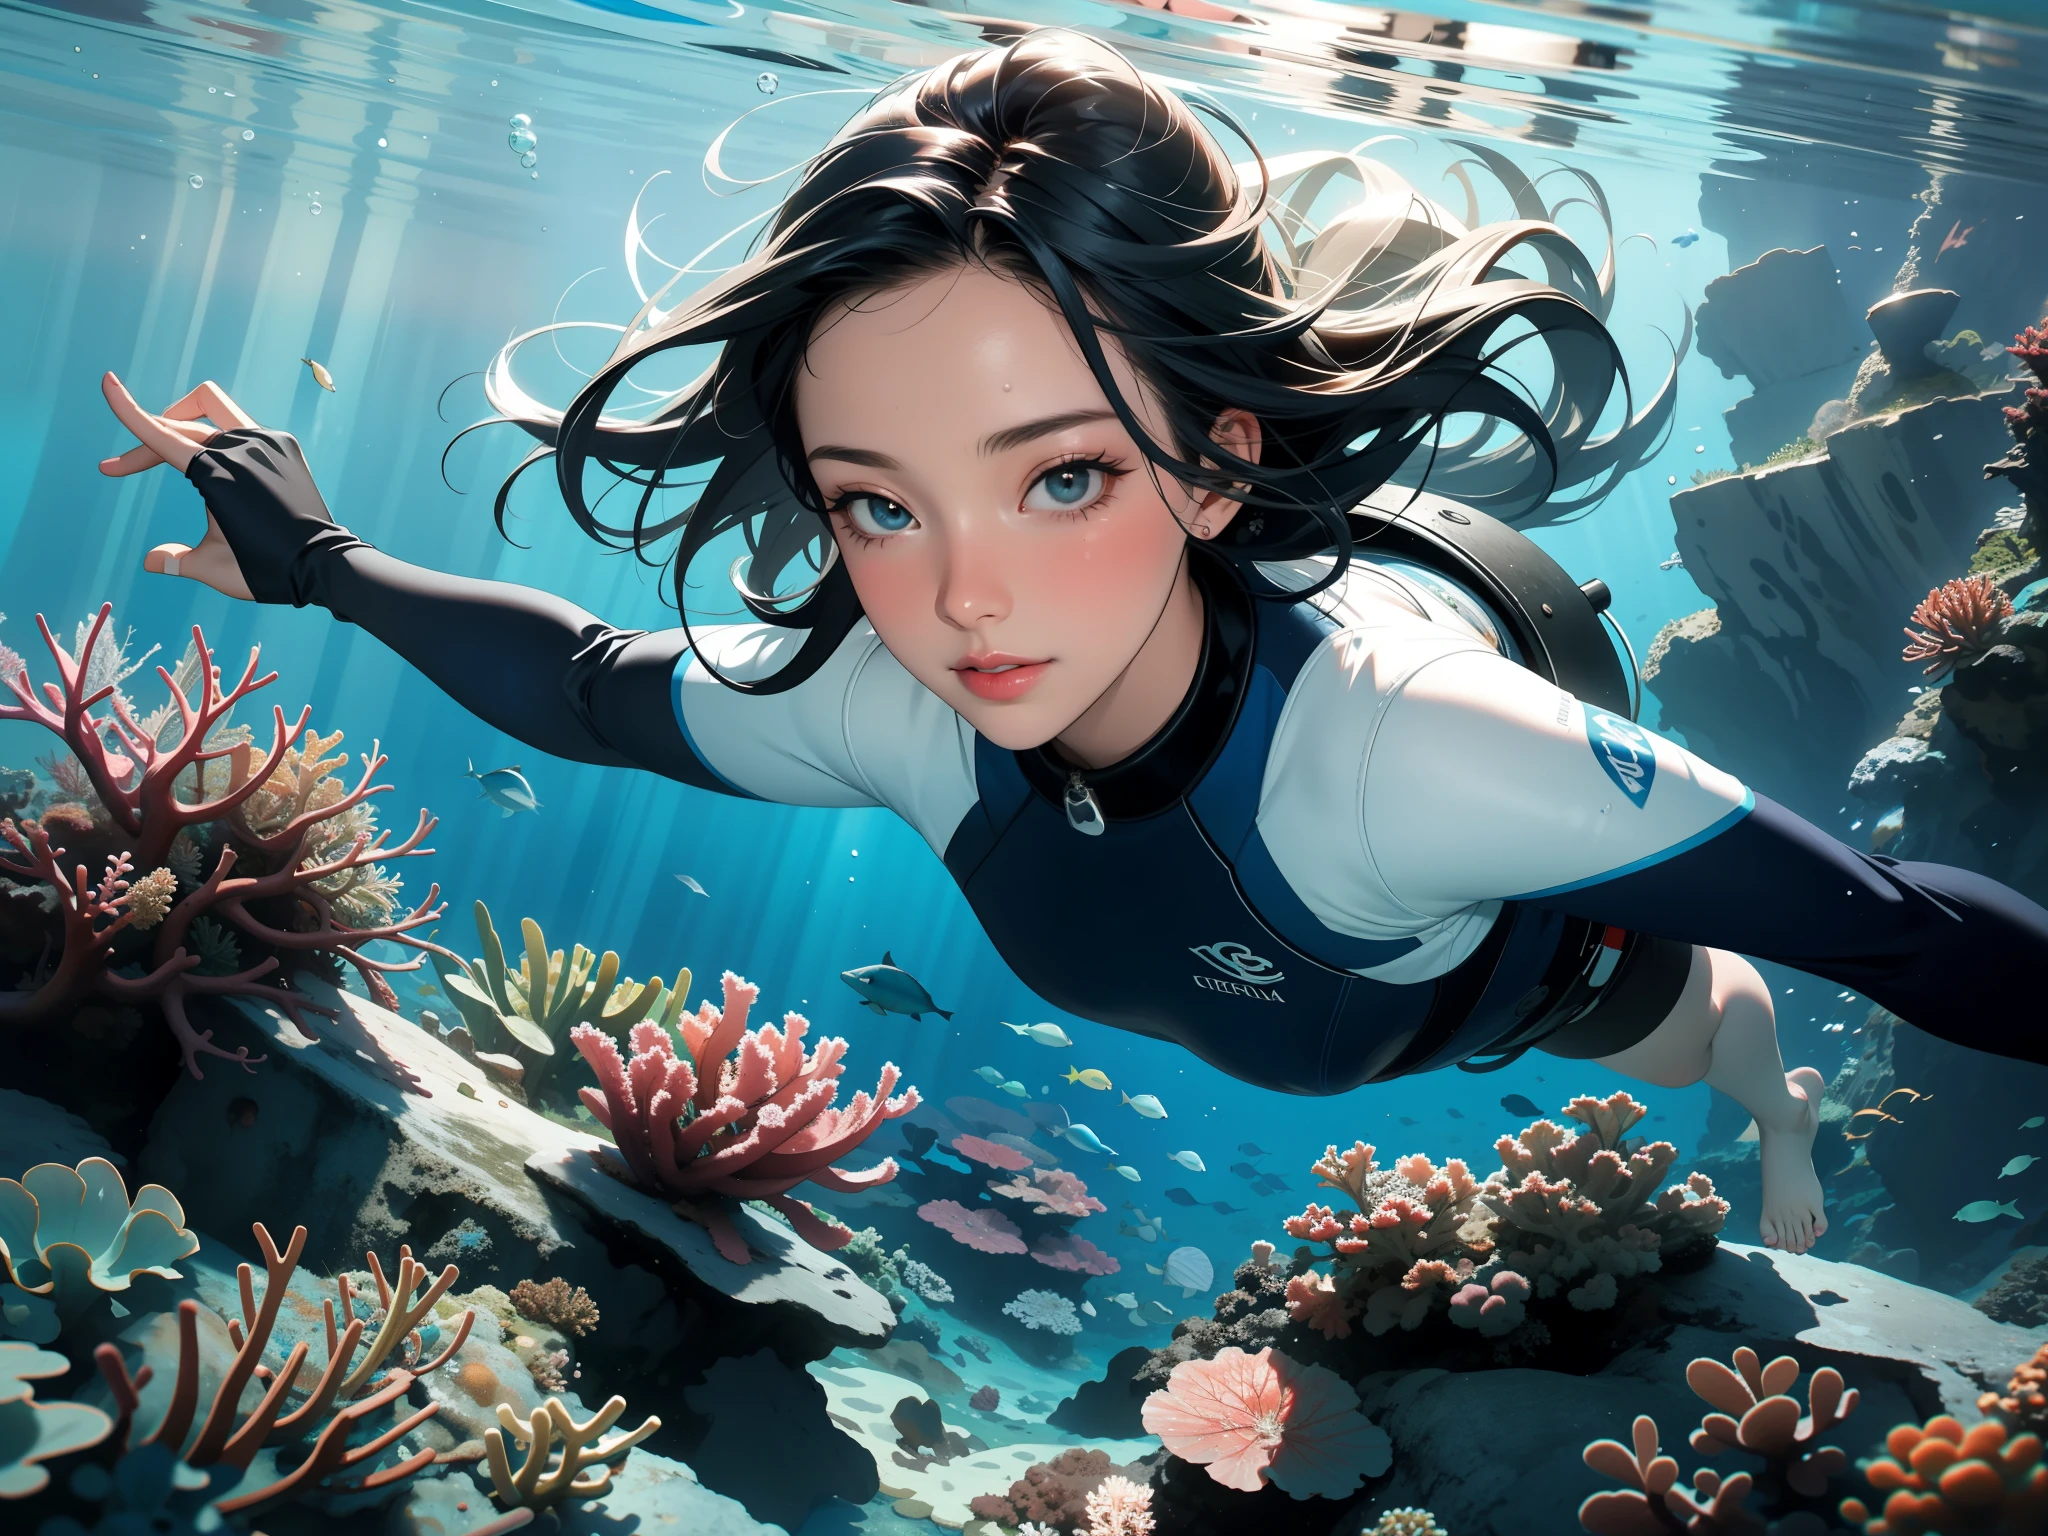 a beautiful woman diving,best quality,realistic,underwater,deep blue water,clear water,detailed bubbles,sunlight filtering,rippling waves,serene expression,wavy hair,diving suit,wet hair,goggles,peaceful underwater scene,professional photography,shimmering scales,vibrant corals,sea plants,rays of light,weightless,beautifully lit,graceful movement,calm and tranquil ambiance,sunken ship wreck,marine life,diving adventure,scuba diving,exploring the depths,adventure sports,deep-sea exploration,crystal clear visibility,slices of sunlight,submerged beauty,underwater paradise,mesmerizing views,experiencing the marine world,breathtaking landscapes,dreamlike atmosphere